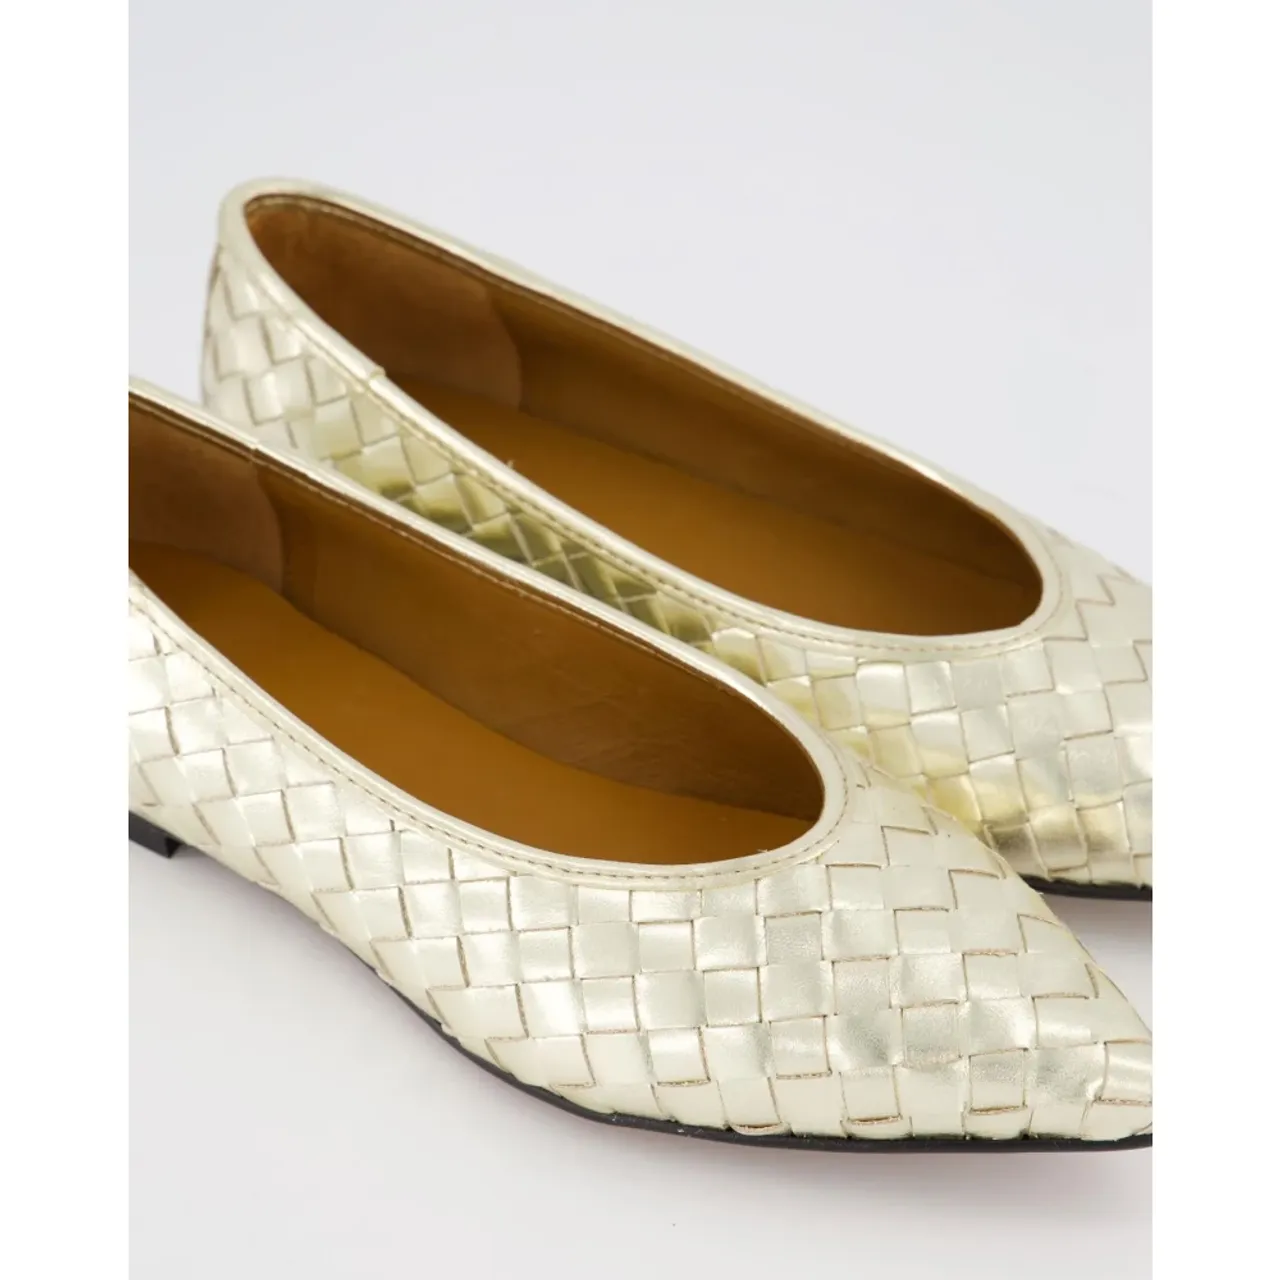 Loafers Toral